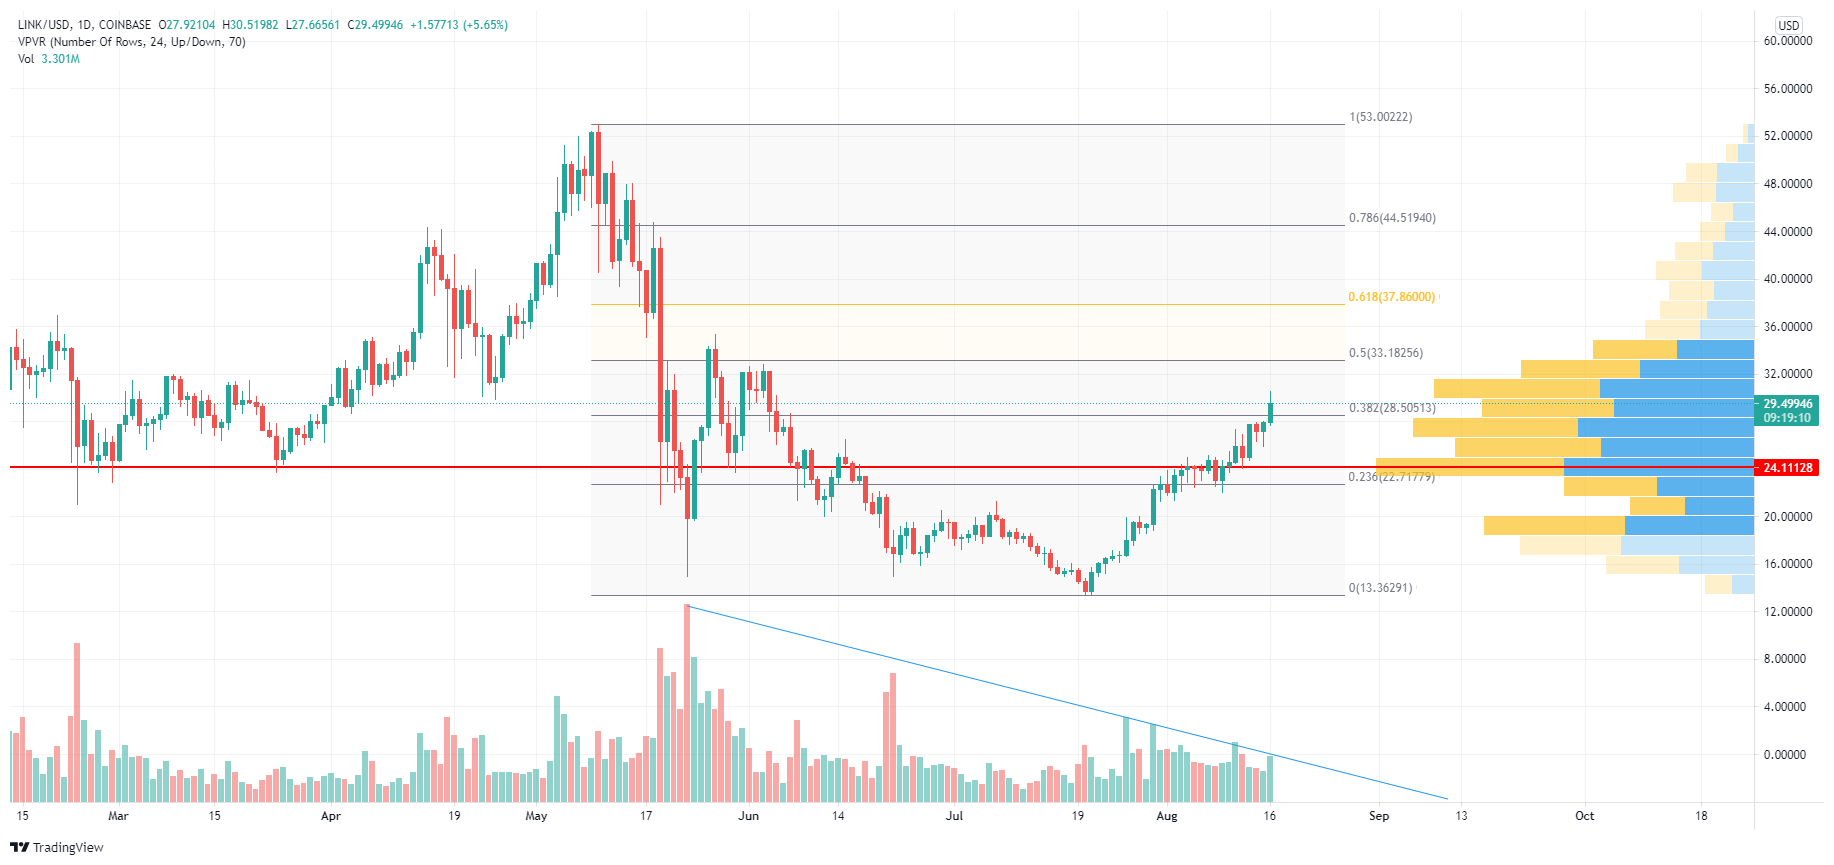 Chainlink (LINK) Continues Rally After Reclaiming Long-Term Support